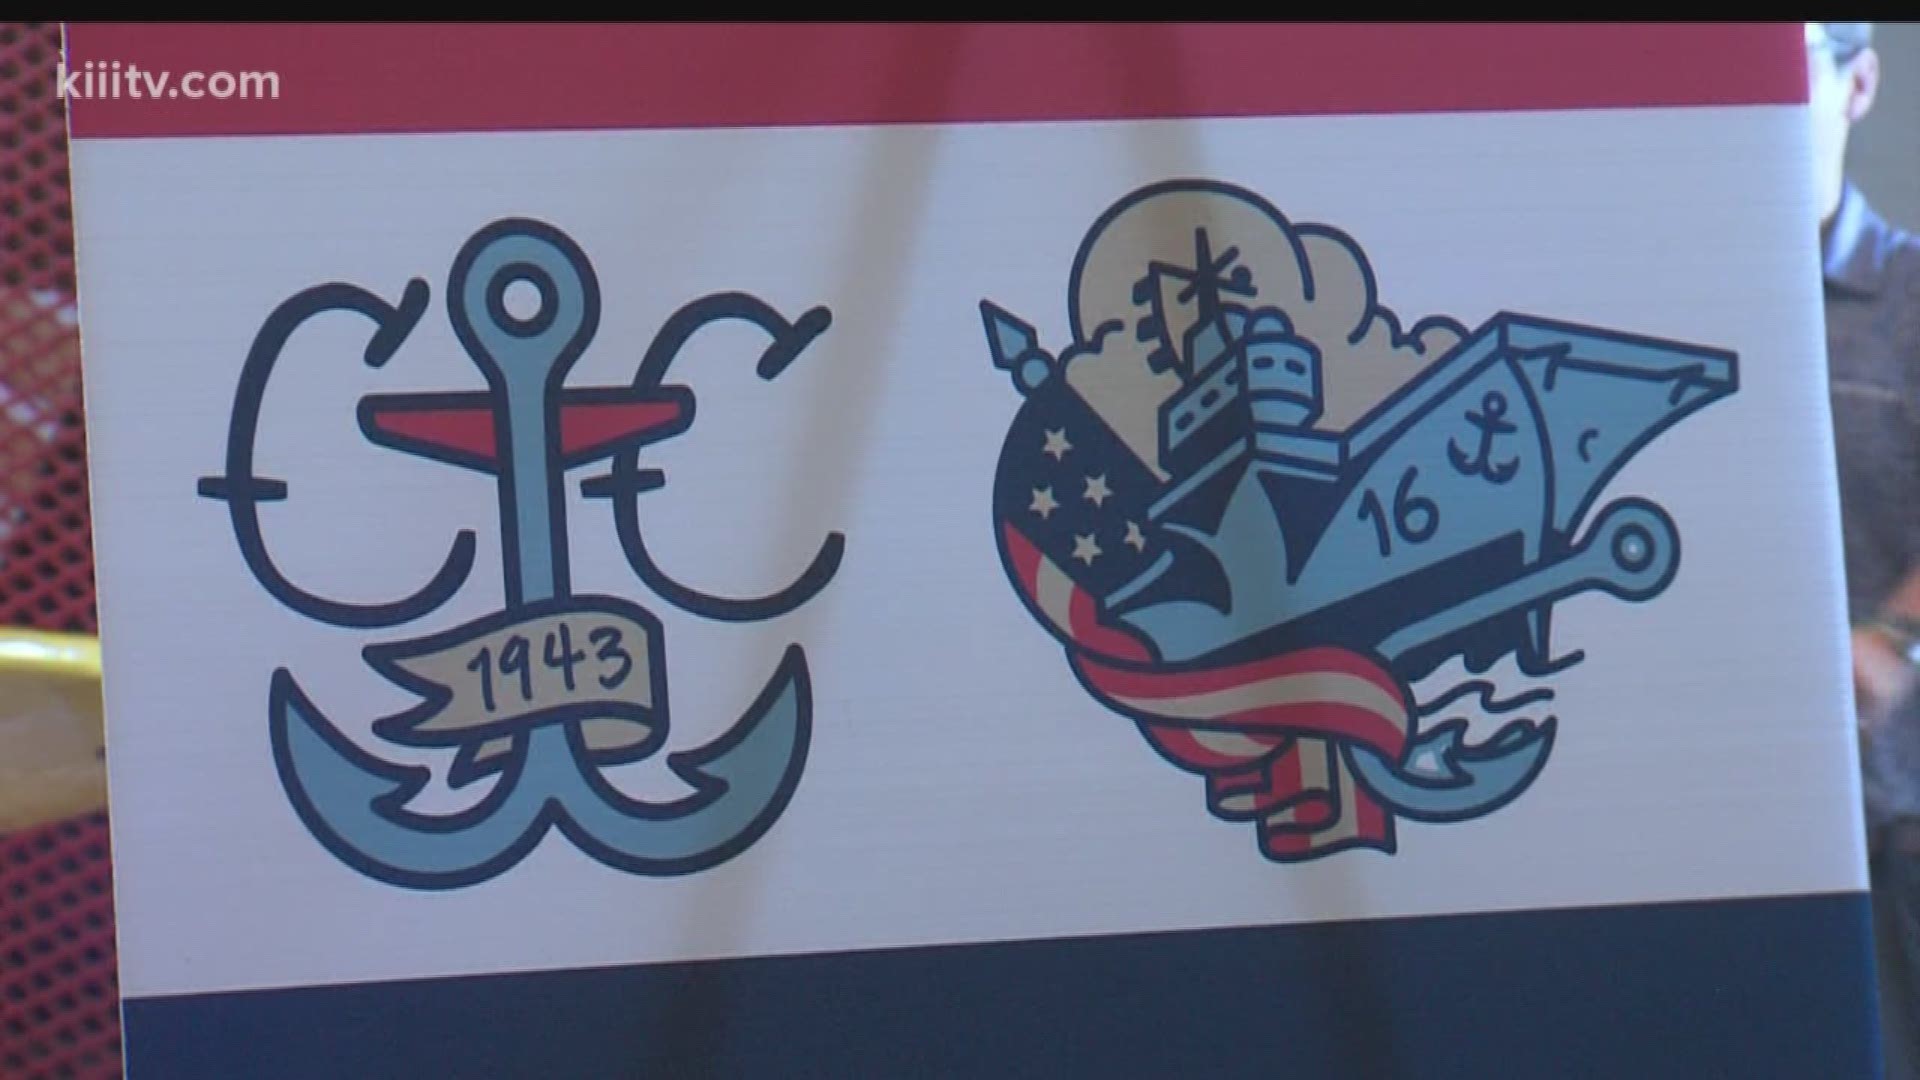 The Corpus Christi Hooks are partnering with the USS Lexington and will take the field during a few games in June as the Corpus Christi Blue Ghosts.